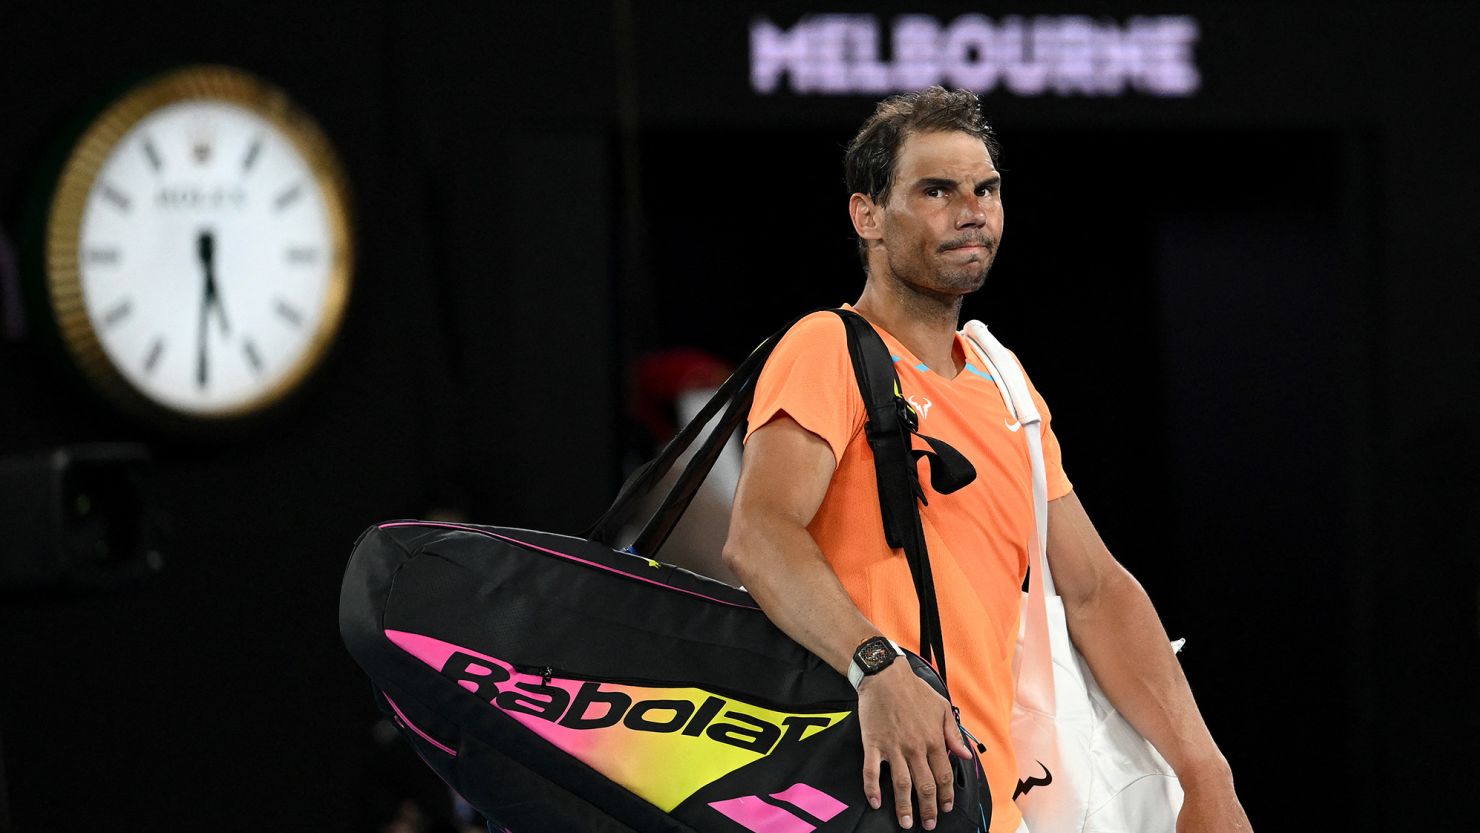 No male player has spent as many weeks in the top 10 as Rafael Nadal. 